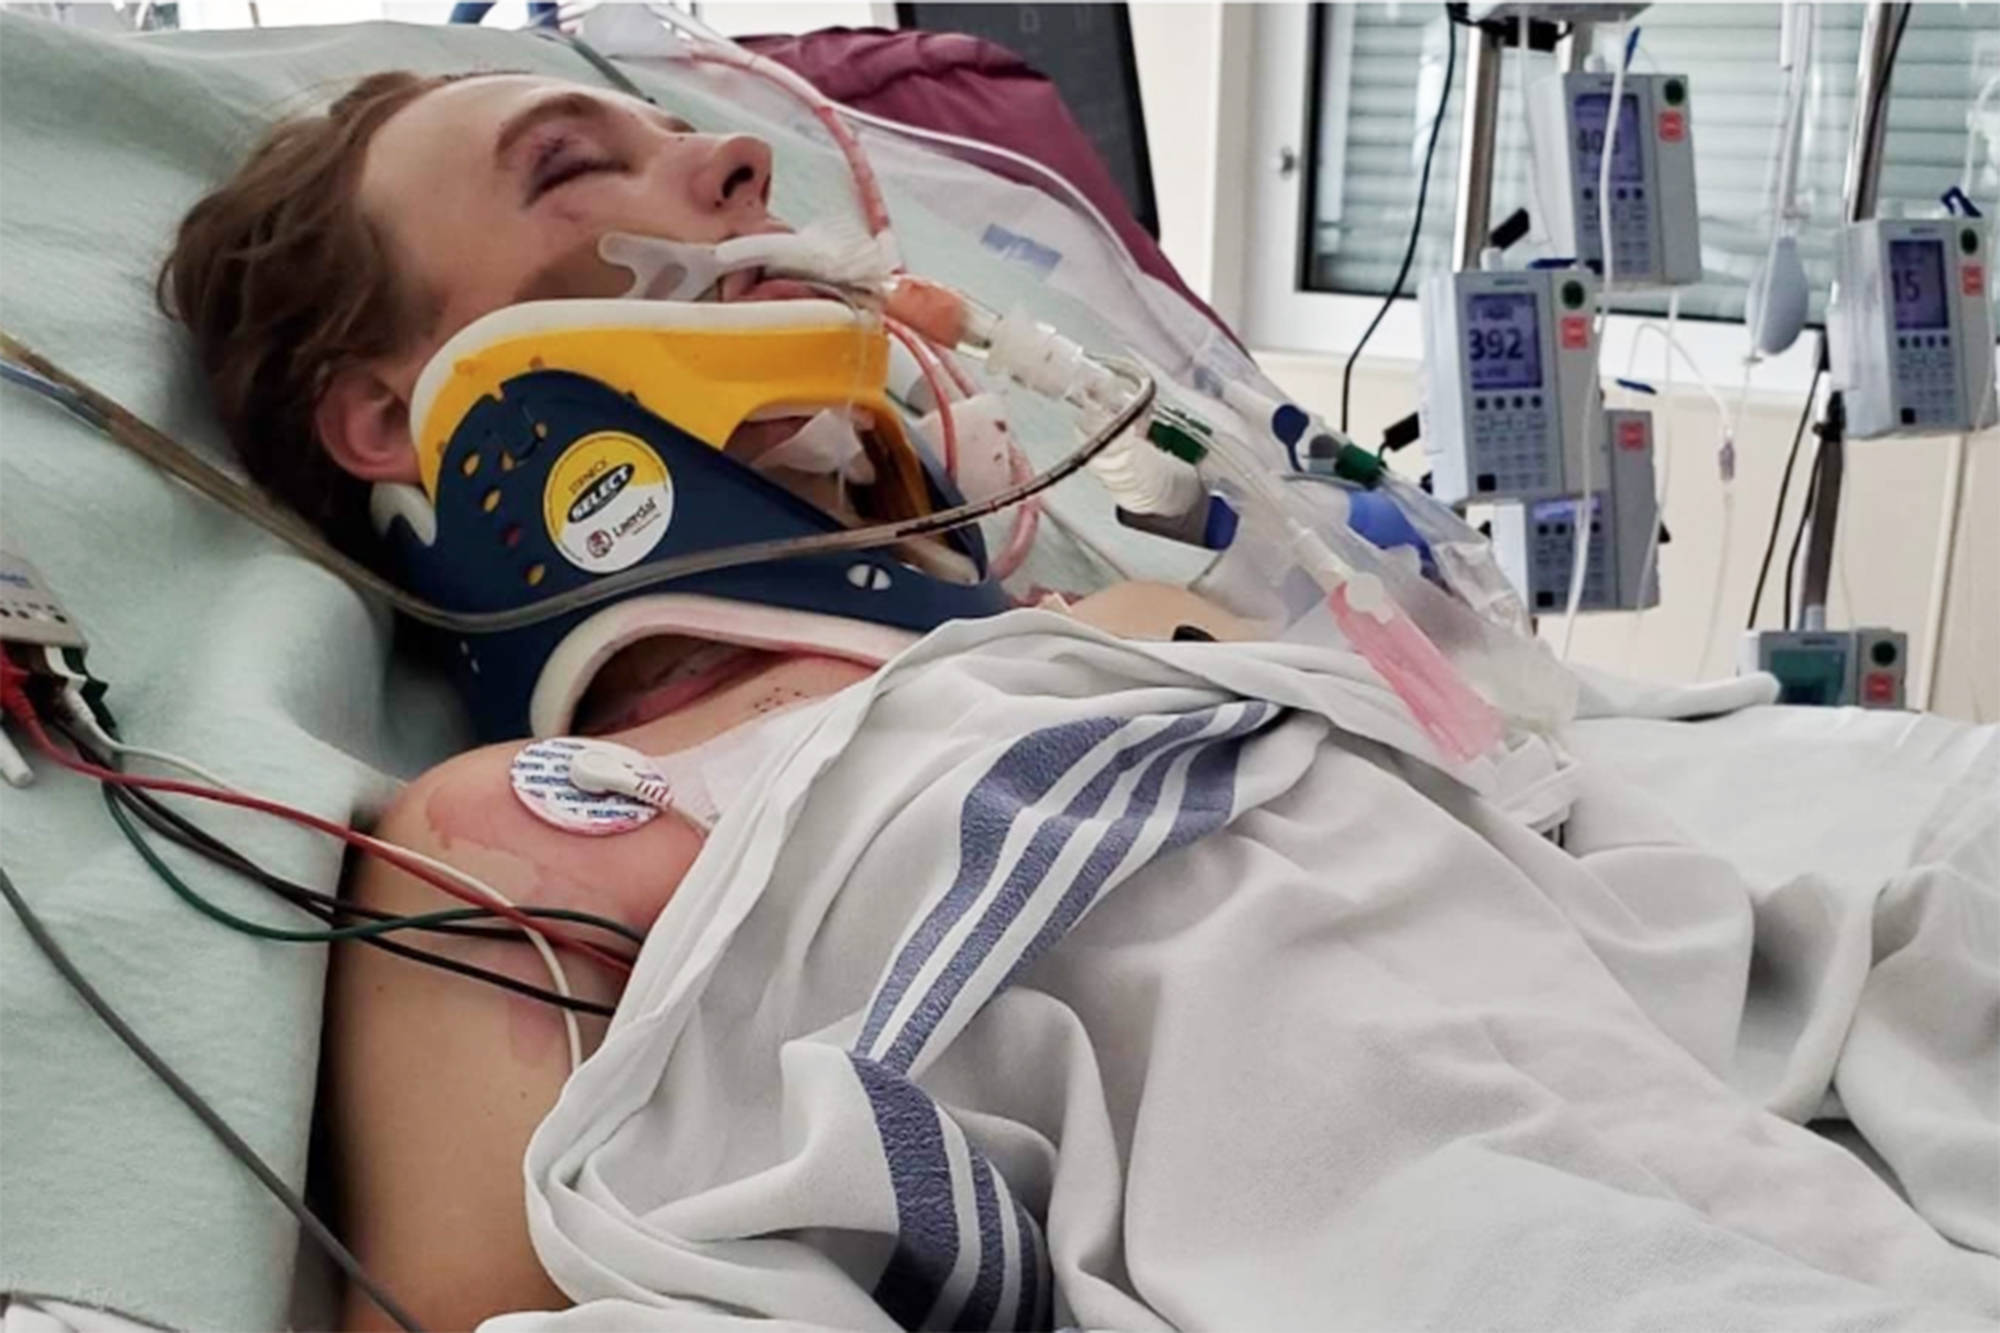 Colby Kalke remains in intensive care at Royal Inland Hospital following a June 3 motor-vehicle collision. (Colby Yost/Gofundme photo)